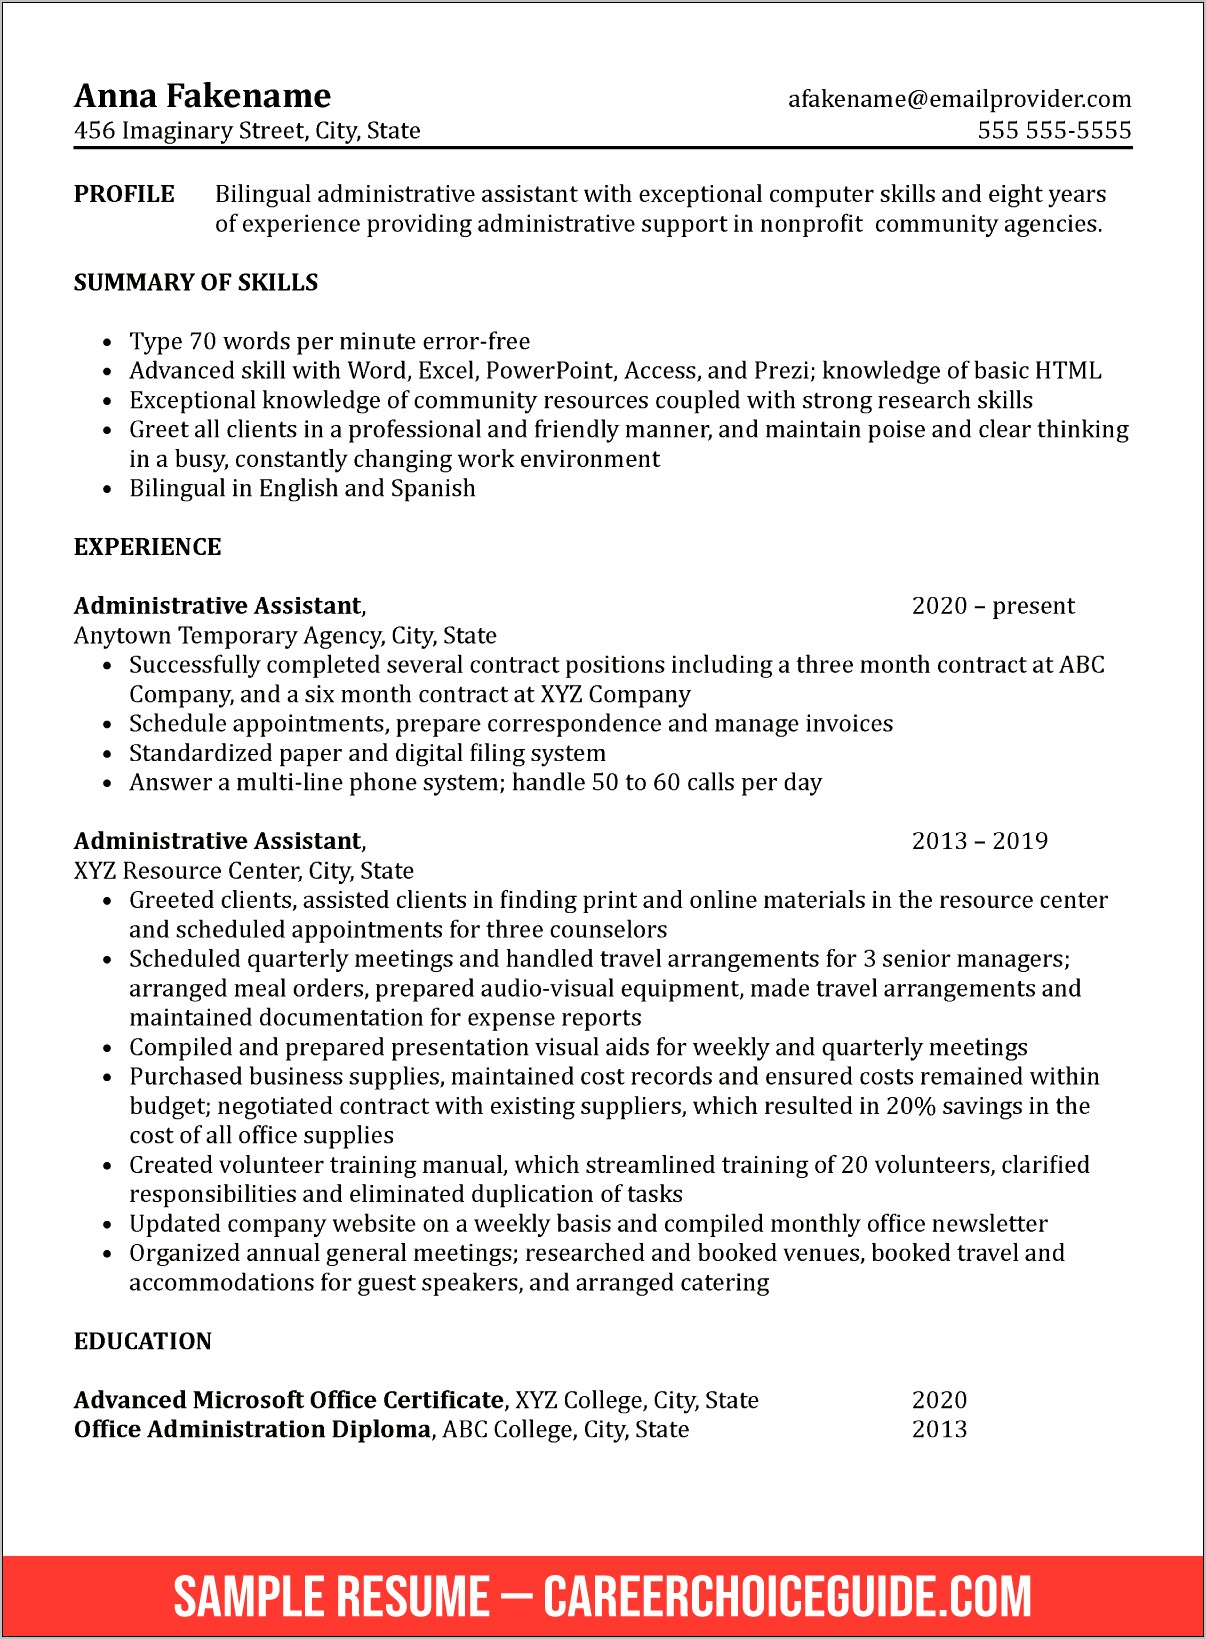 Resume Examples For Work As An Adminstrative